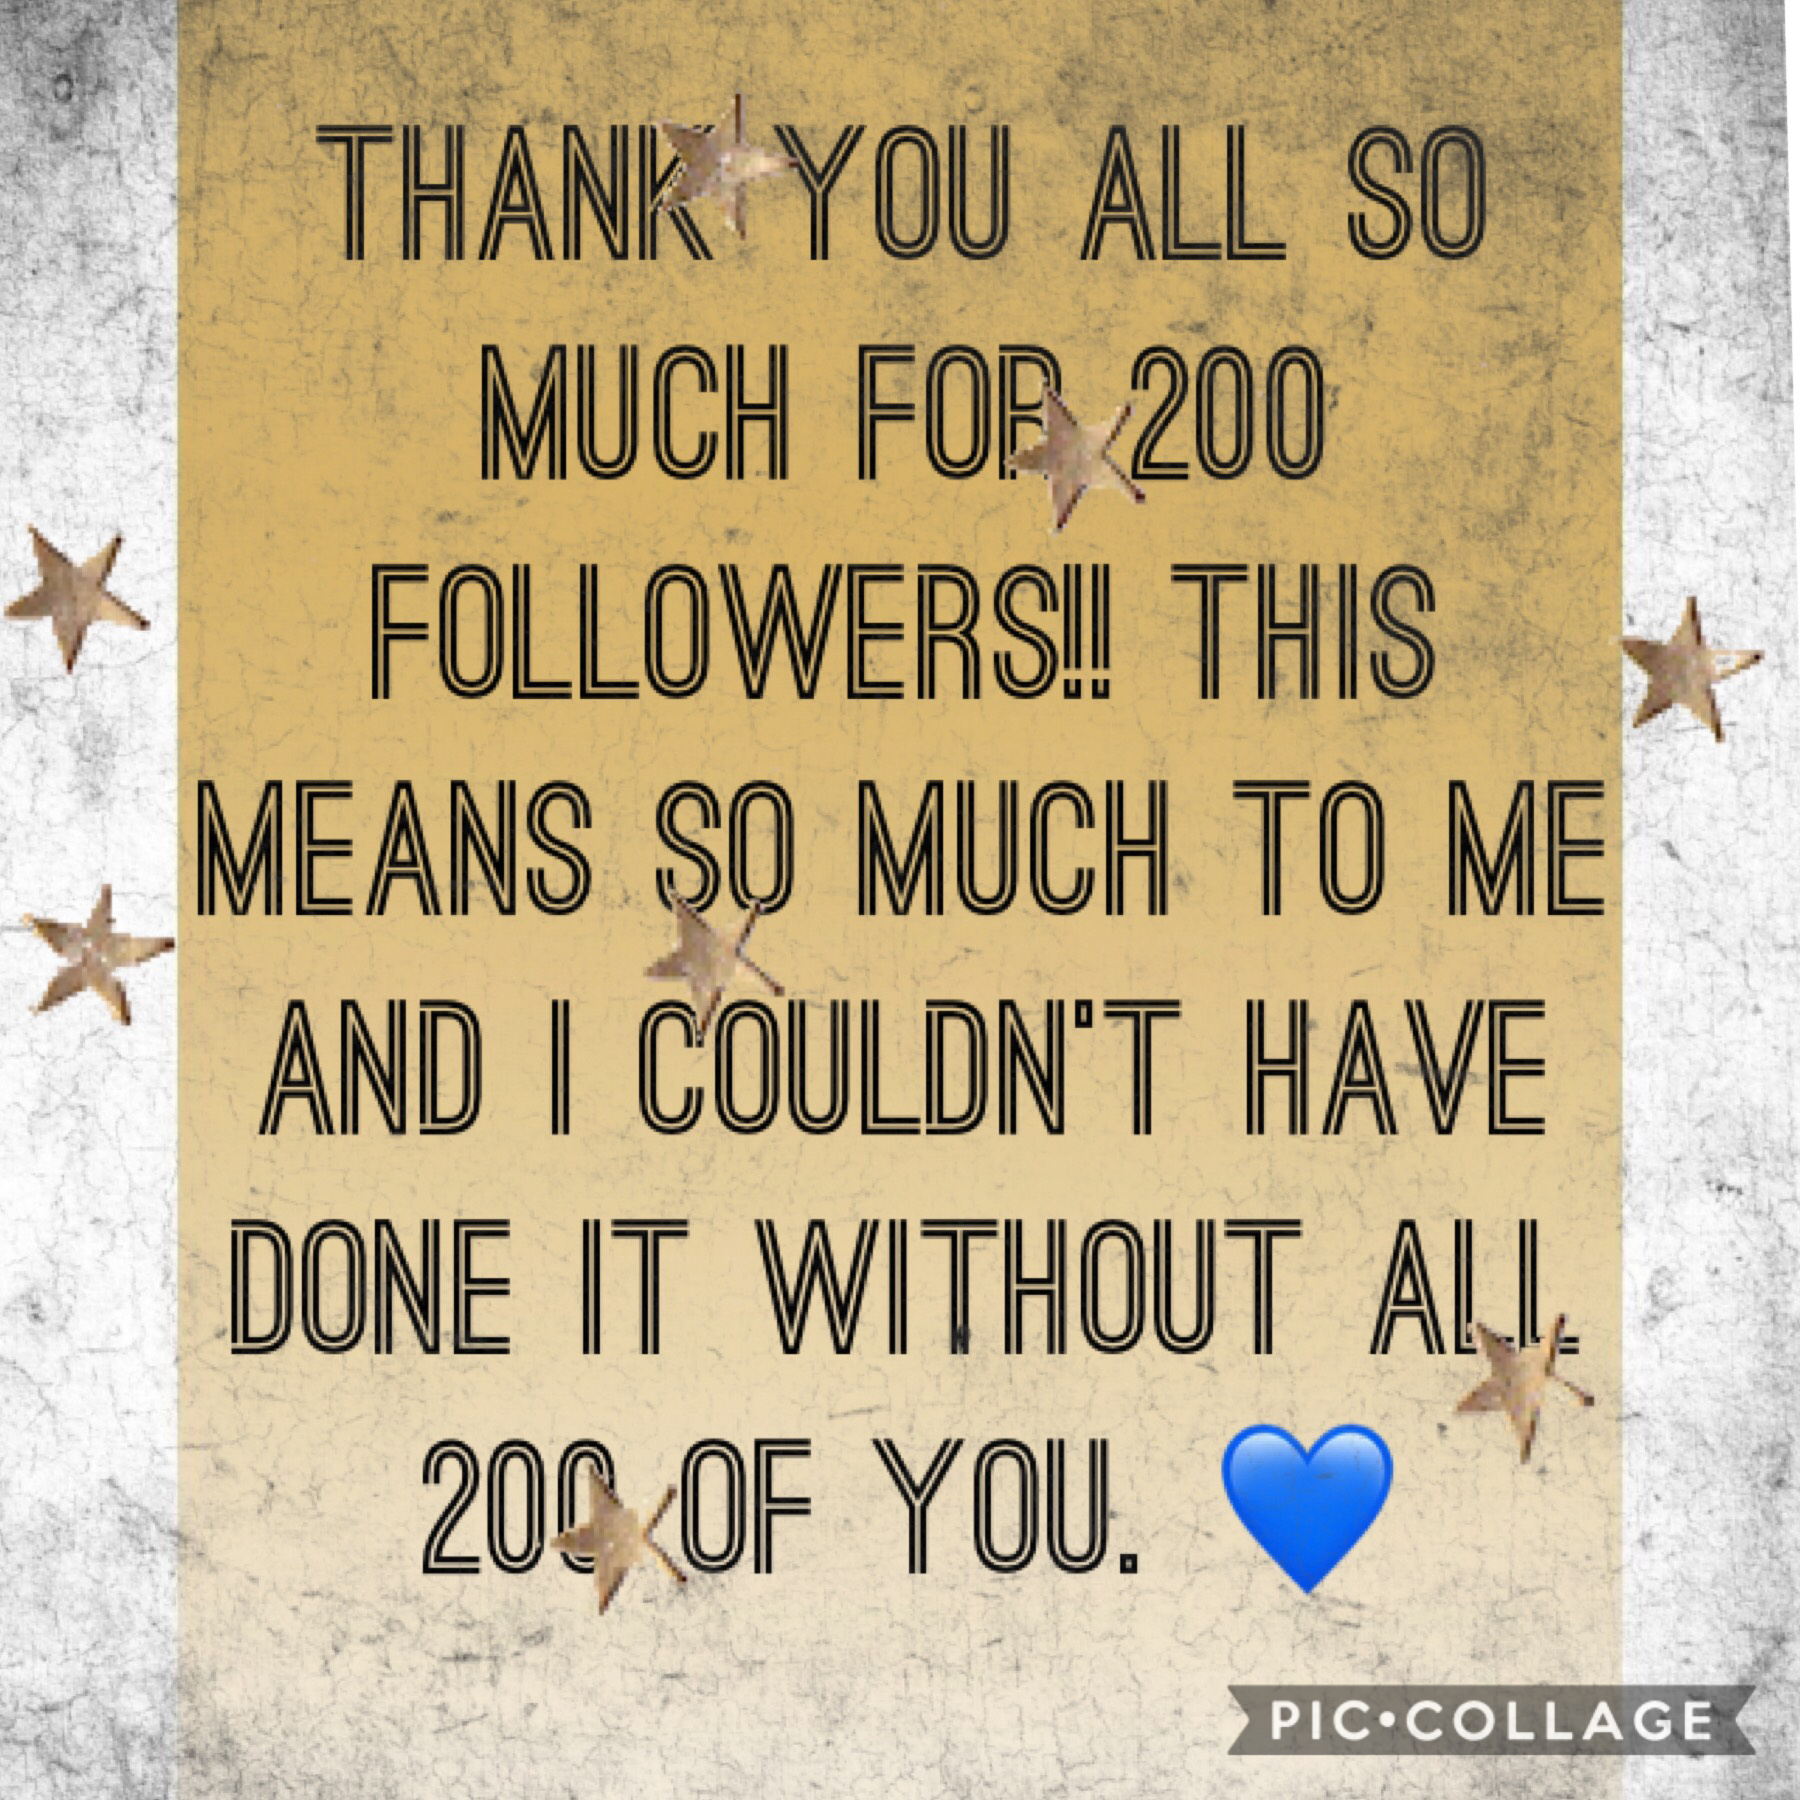 💗Tap💗
OMG THANK YOU ALL SO MUCH!! What should I do for 200? Let me know what you guys think 😊